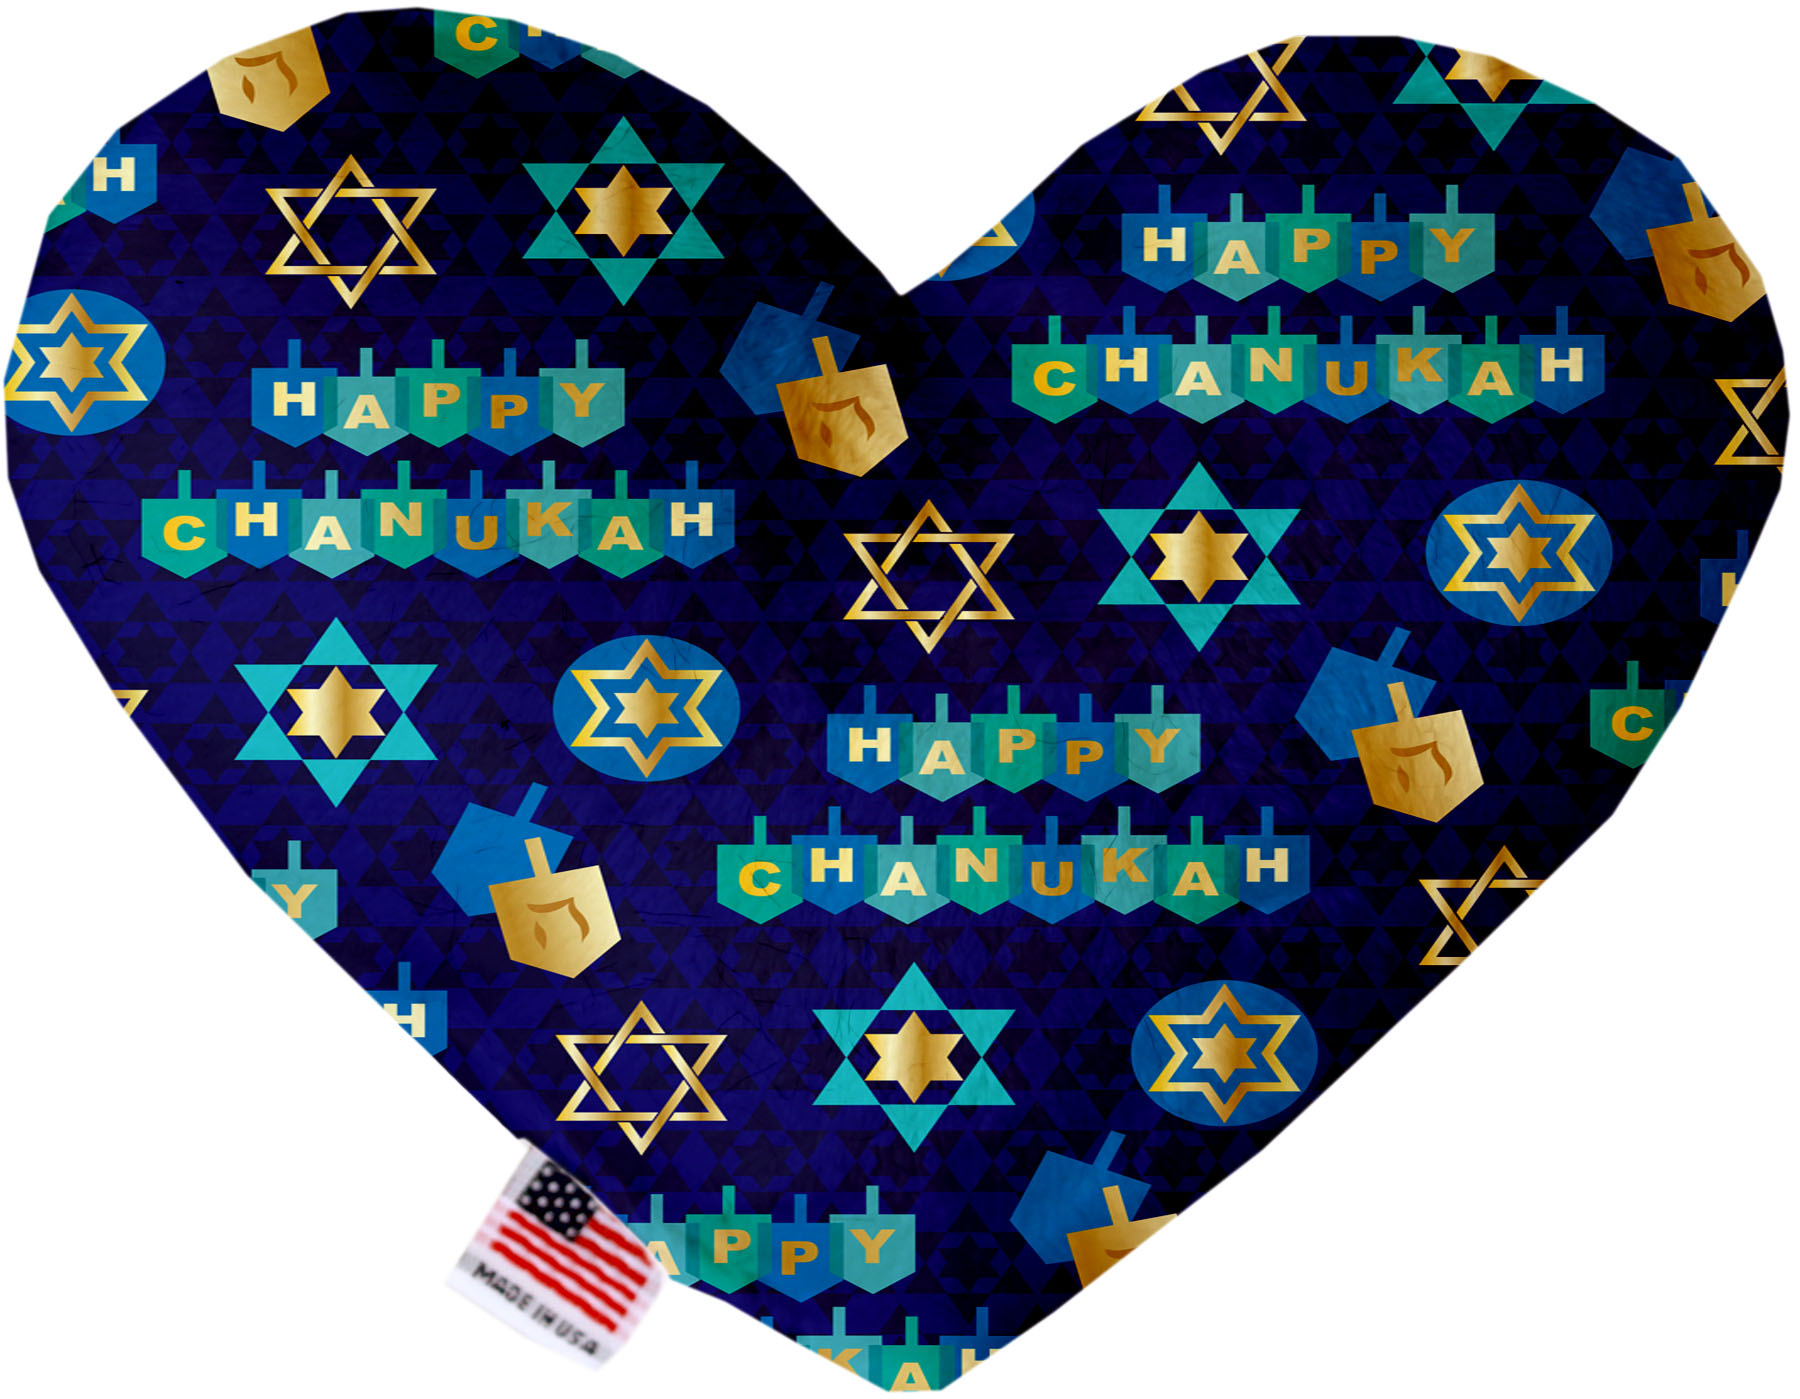 Chanukah Bliss 6 inch Stuffing Free Heart Dog Toy